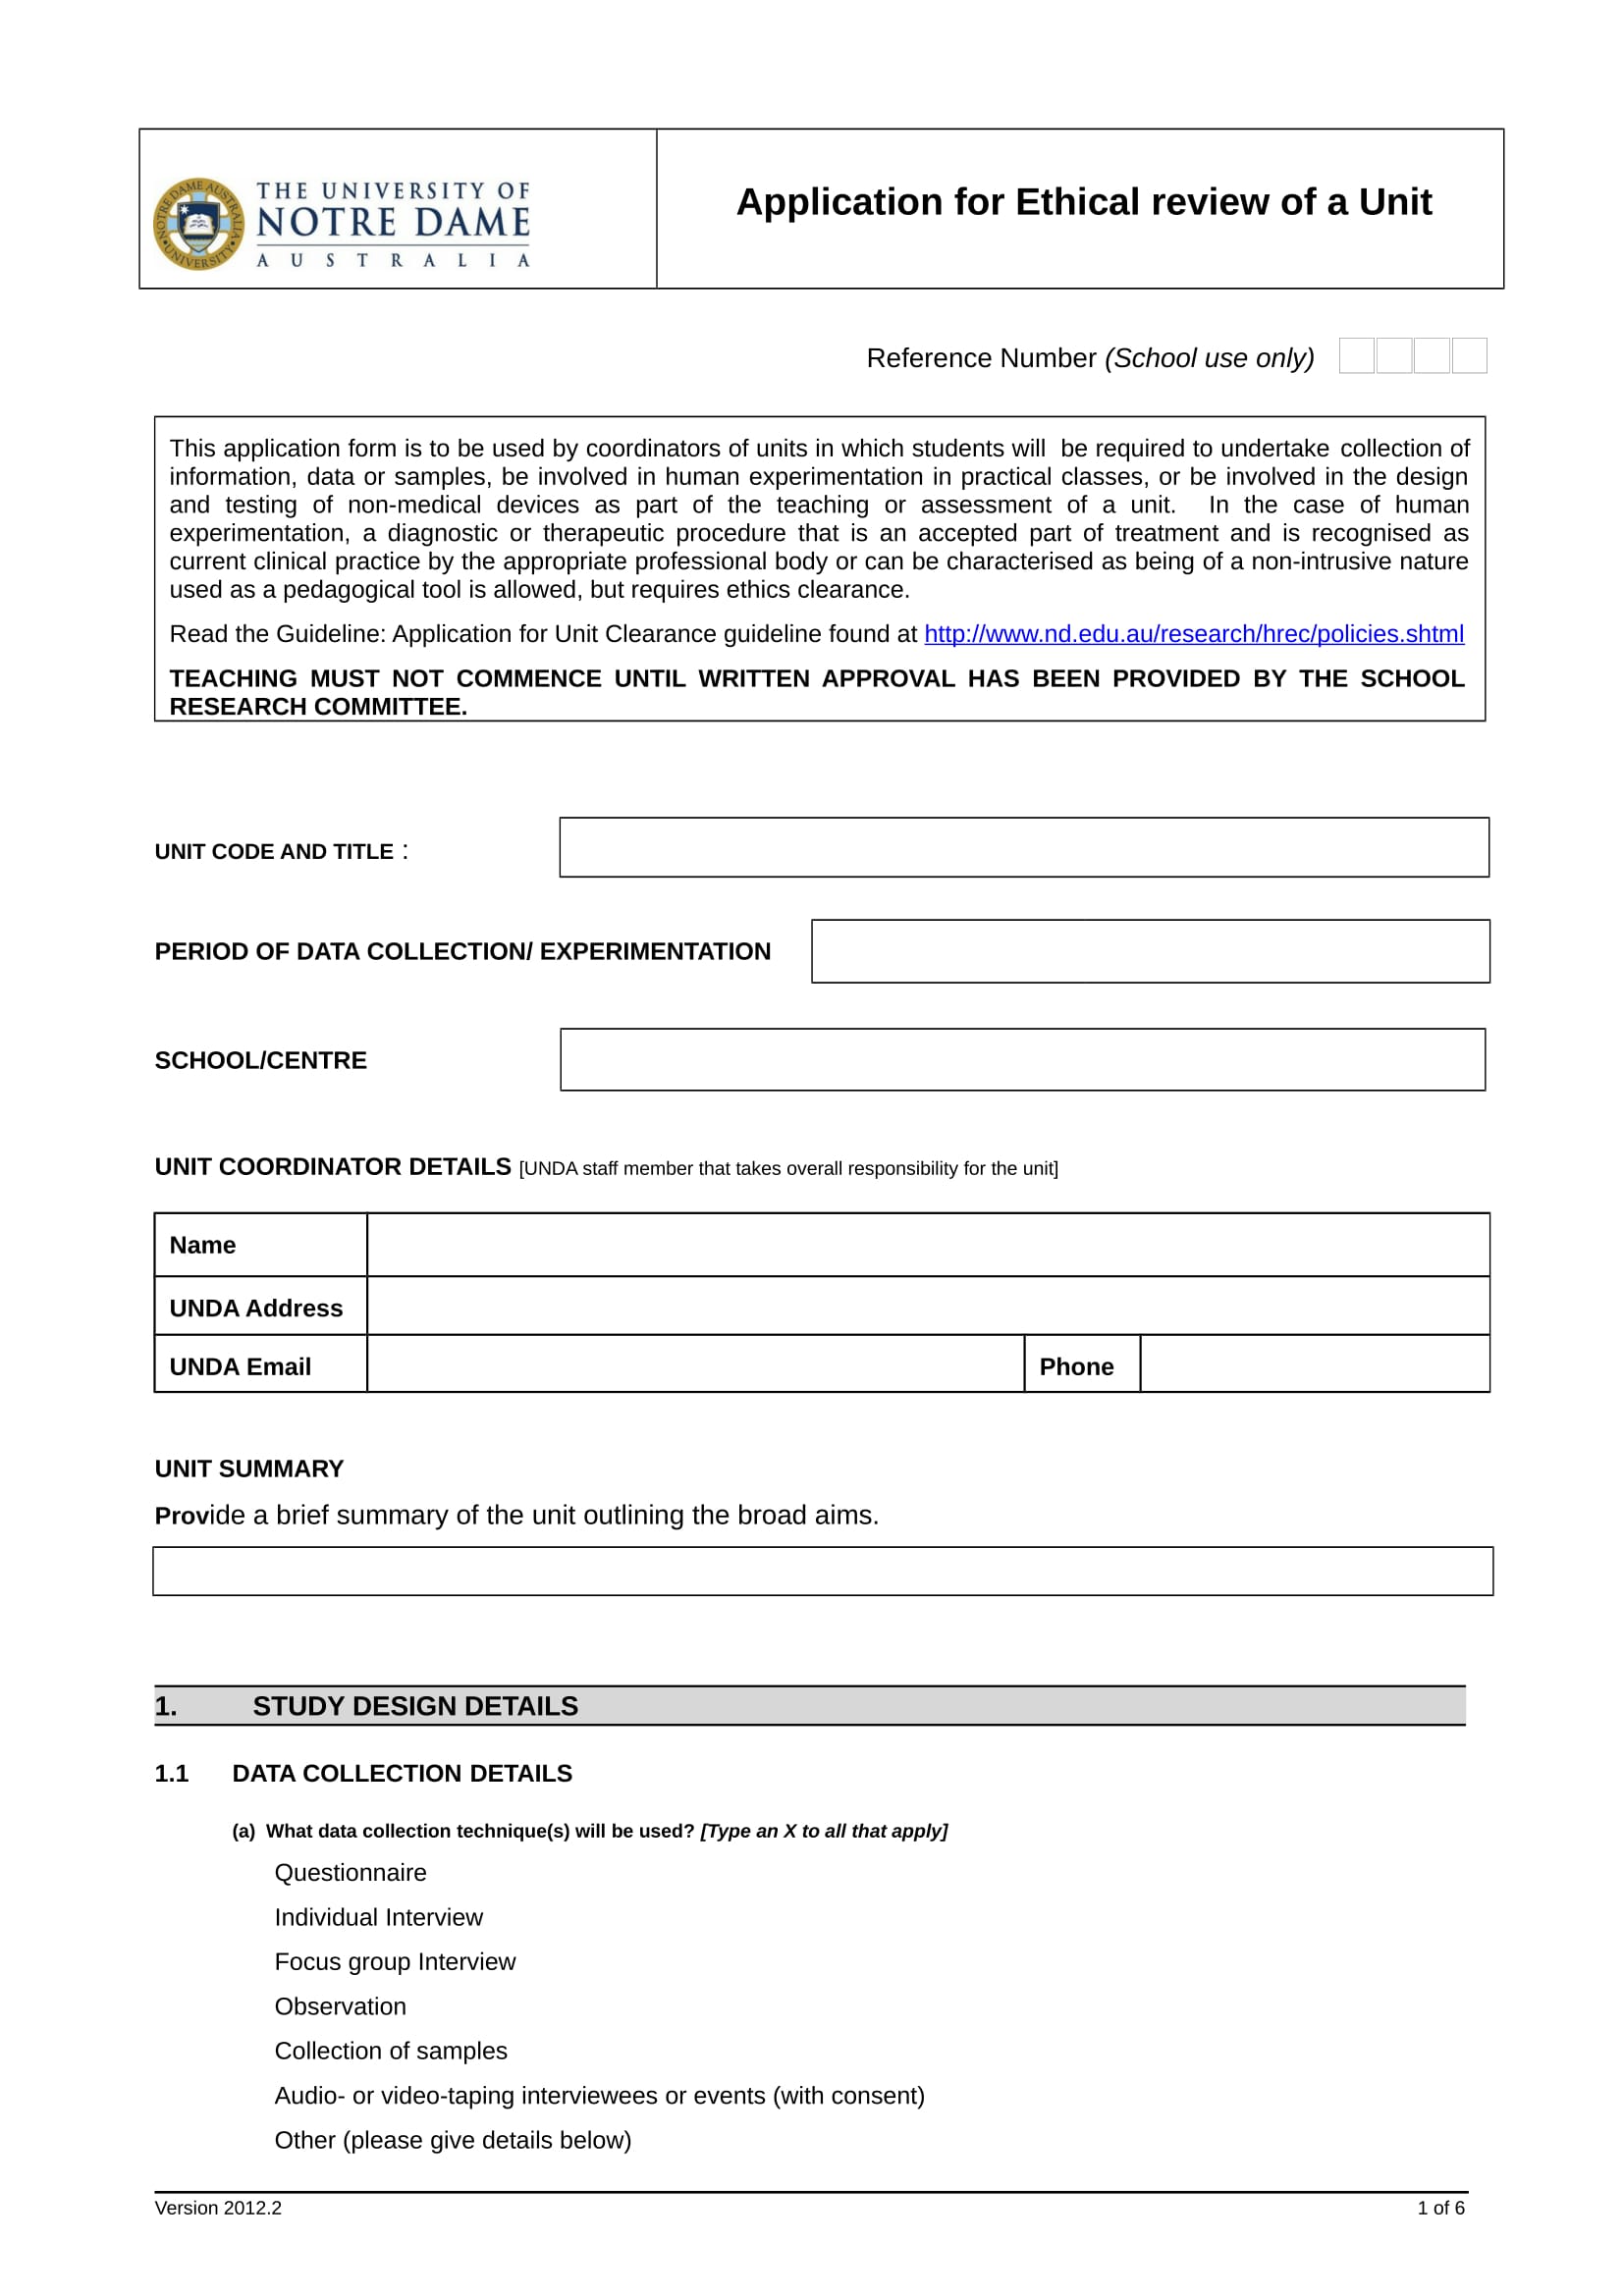 unit clearance application form 1